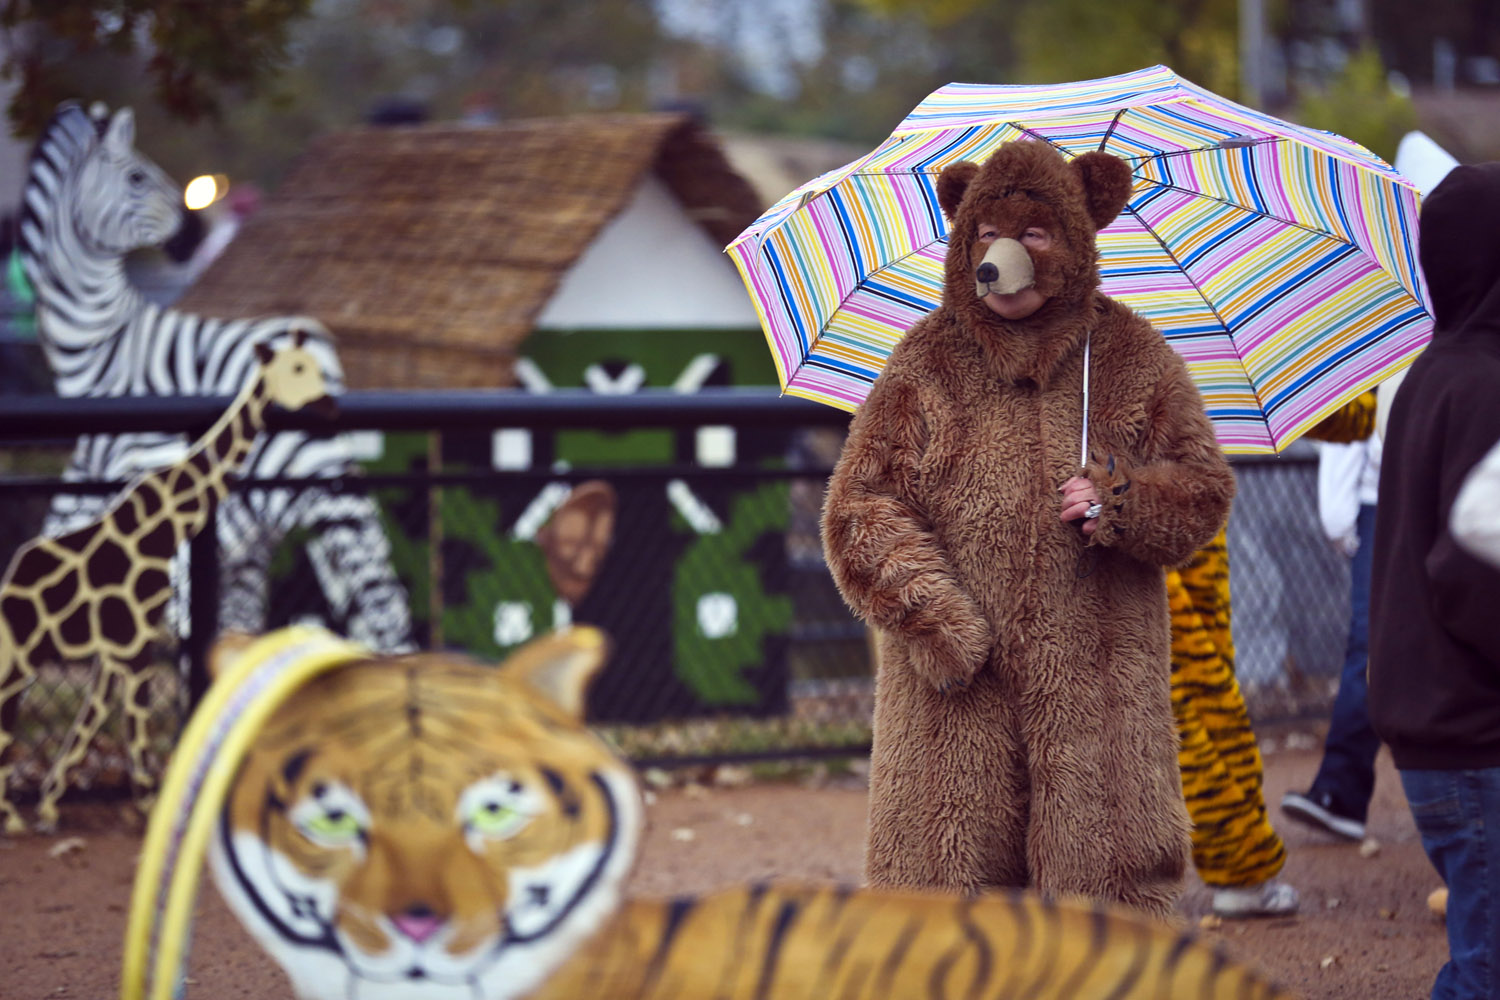 Oct. 20, 2013. Jan Fisher, of Bloomington dressed as a bear, kept dry with her umbrella as she walked through the Como Zoo's ZooBoo in St. Paul, Minn.